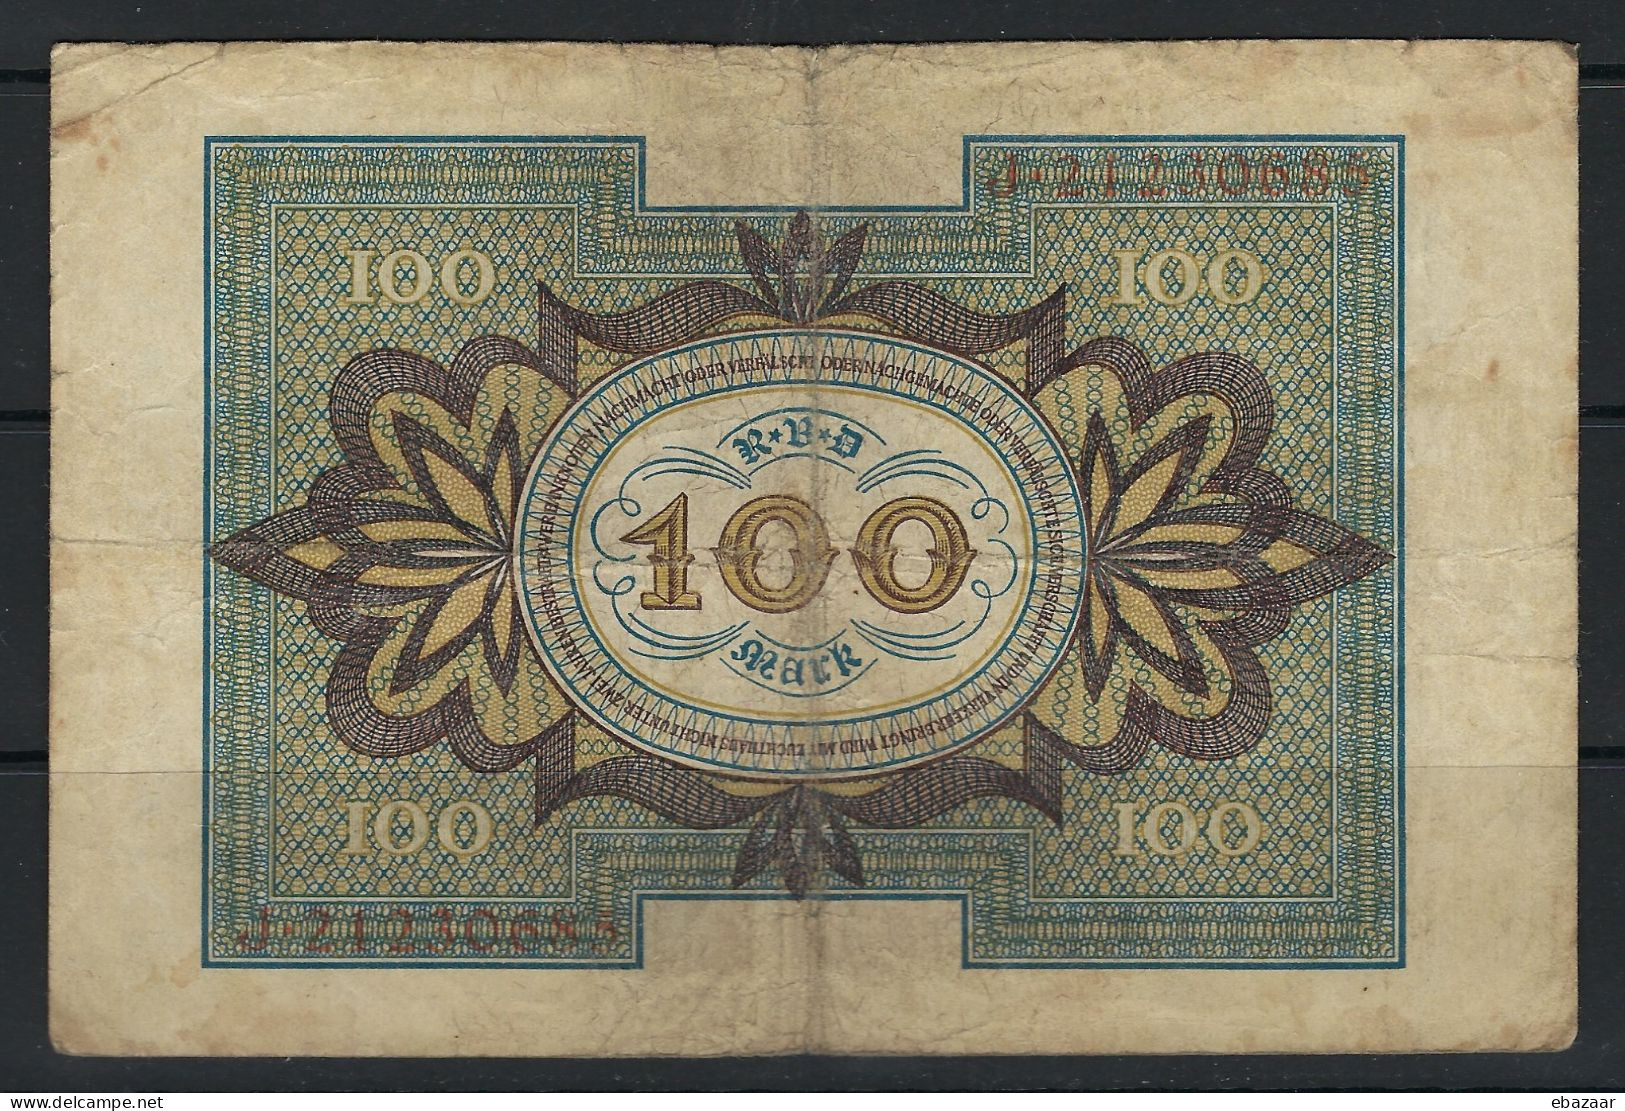 Germany 100 Mark 01.11.1920 Banknote P-69b Circulated With Fold - 100 Mark